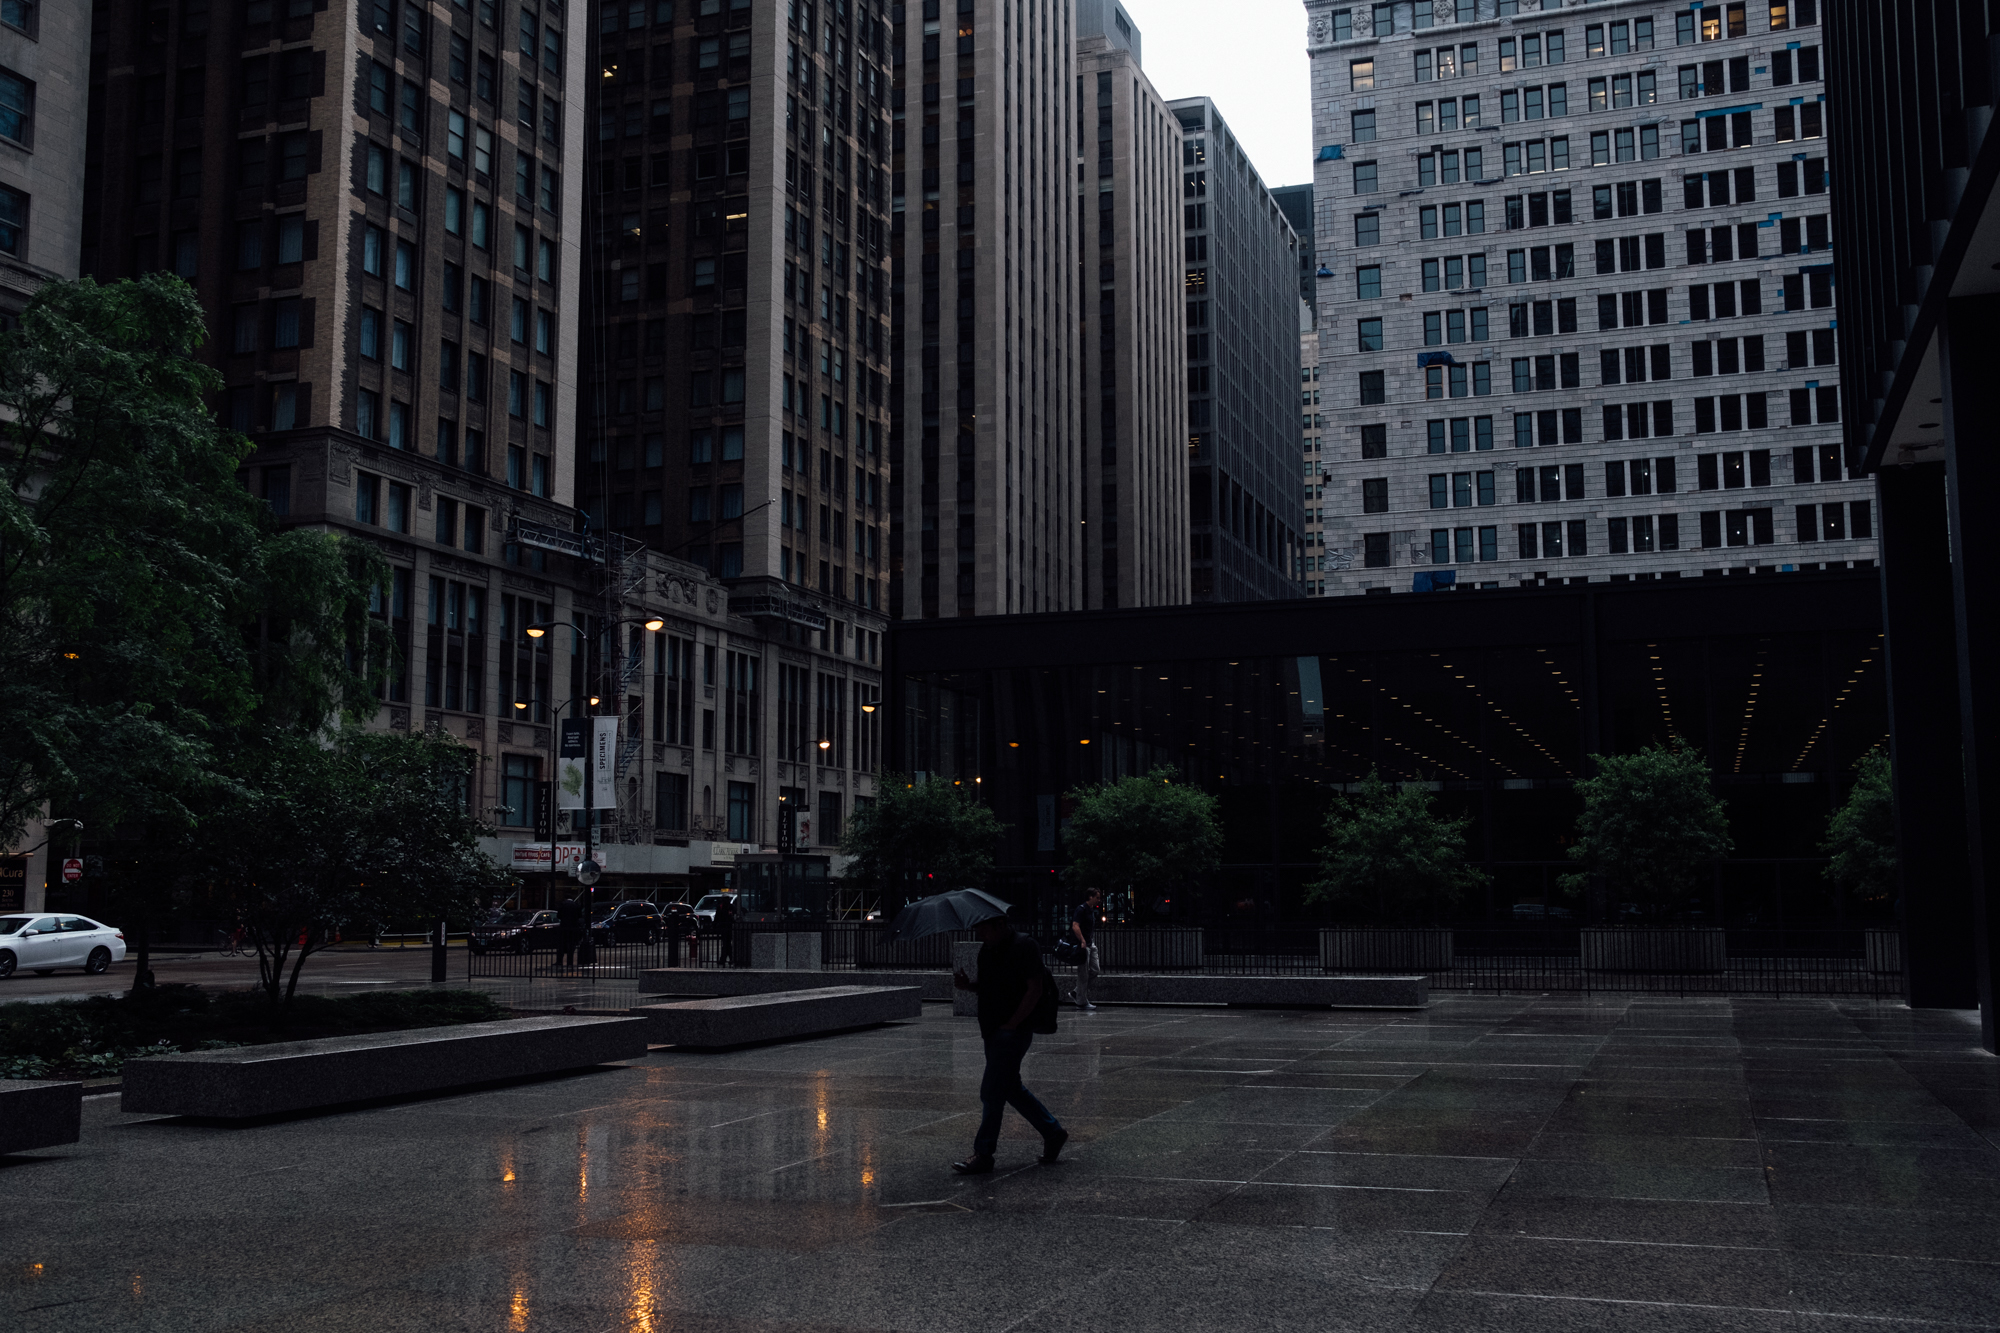 streeterville and chicago (12 of 46).jpg